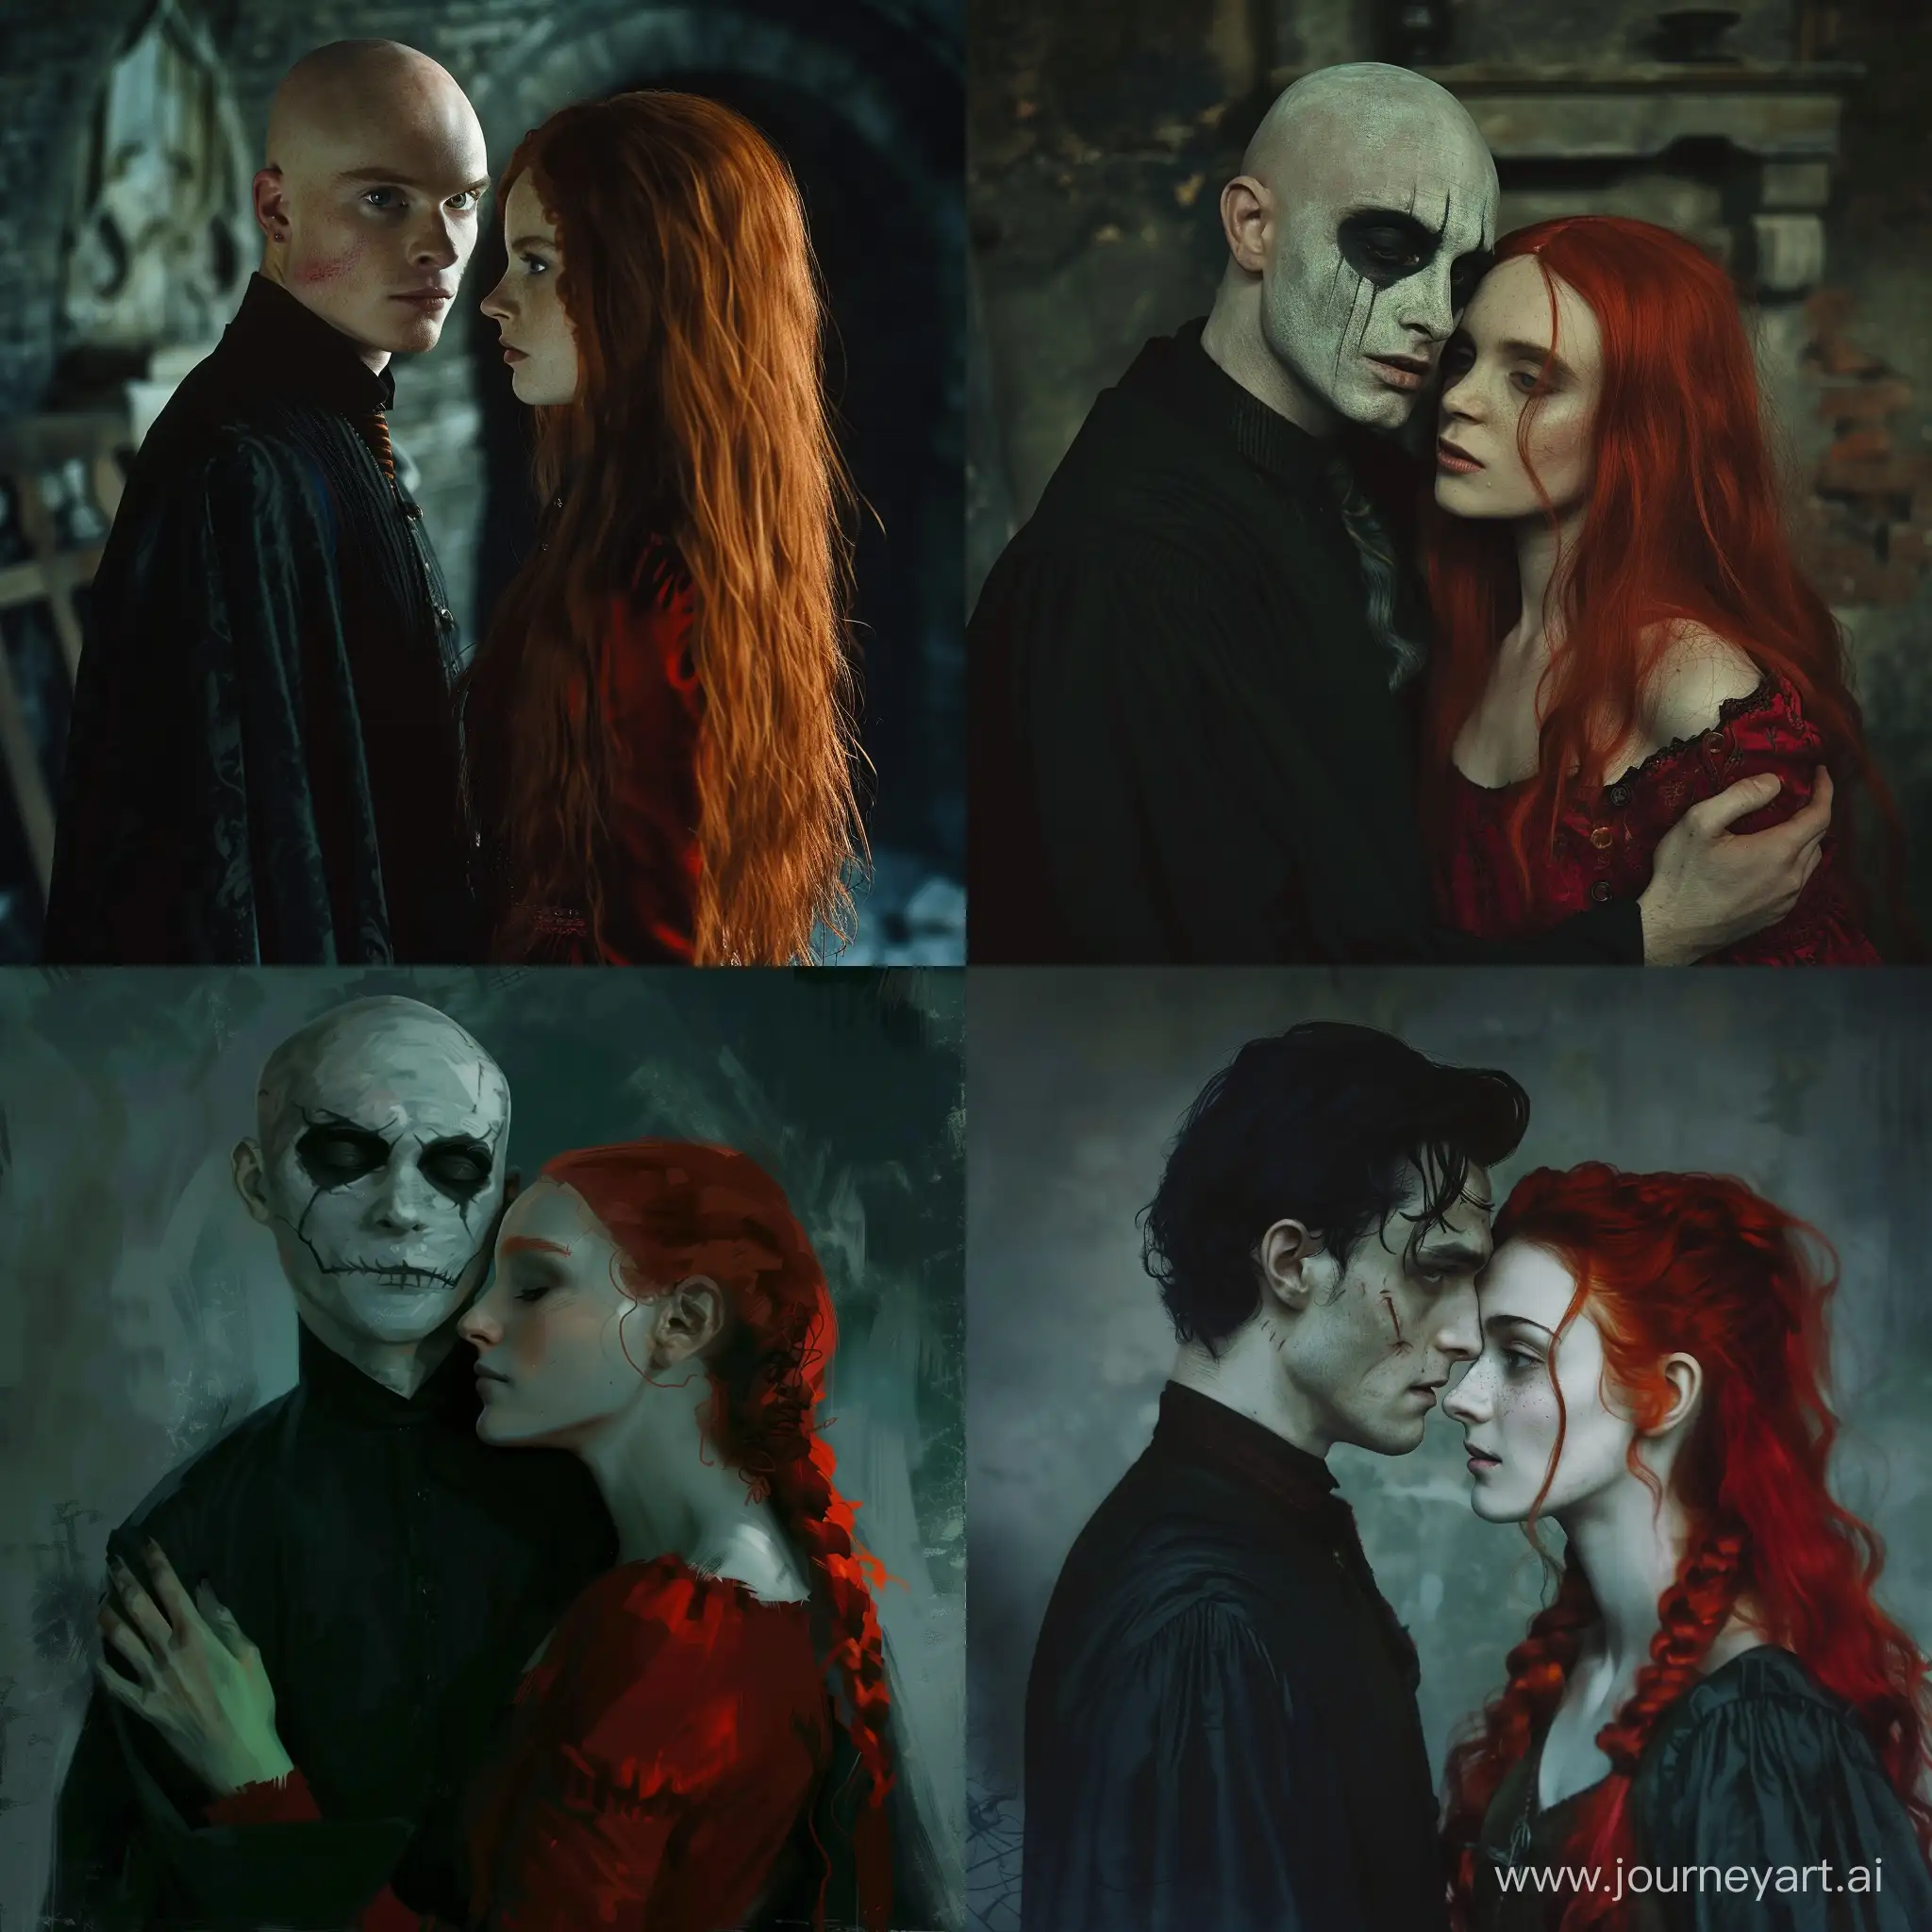 Young-Voldemort-and-RedHaired-Ginny-Encounter